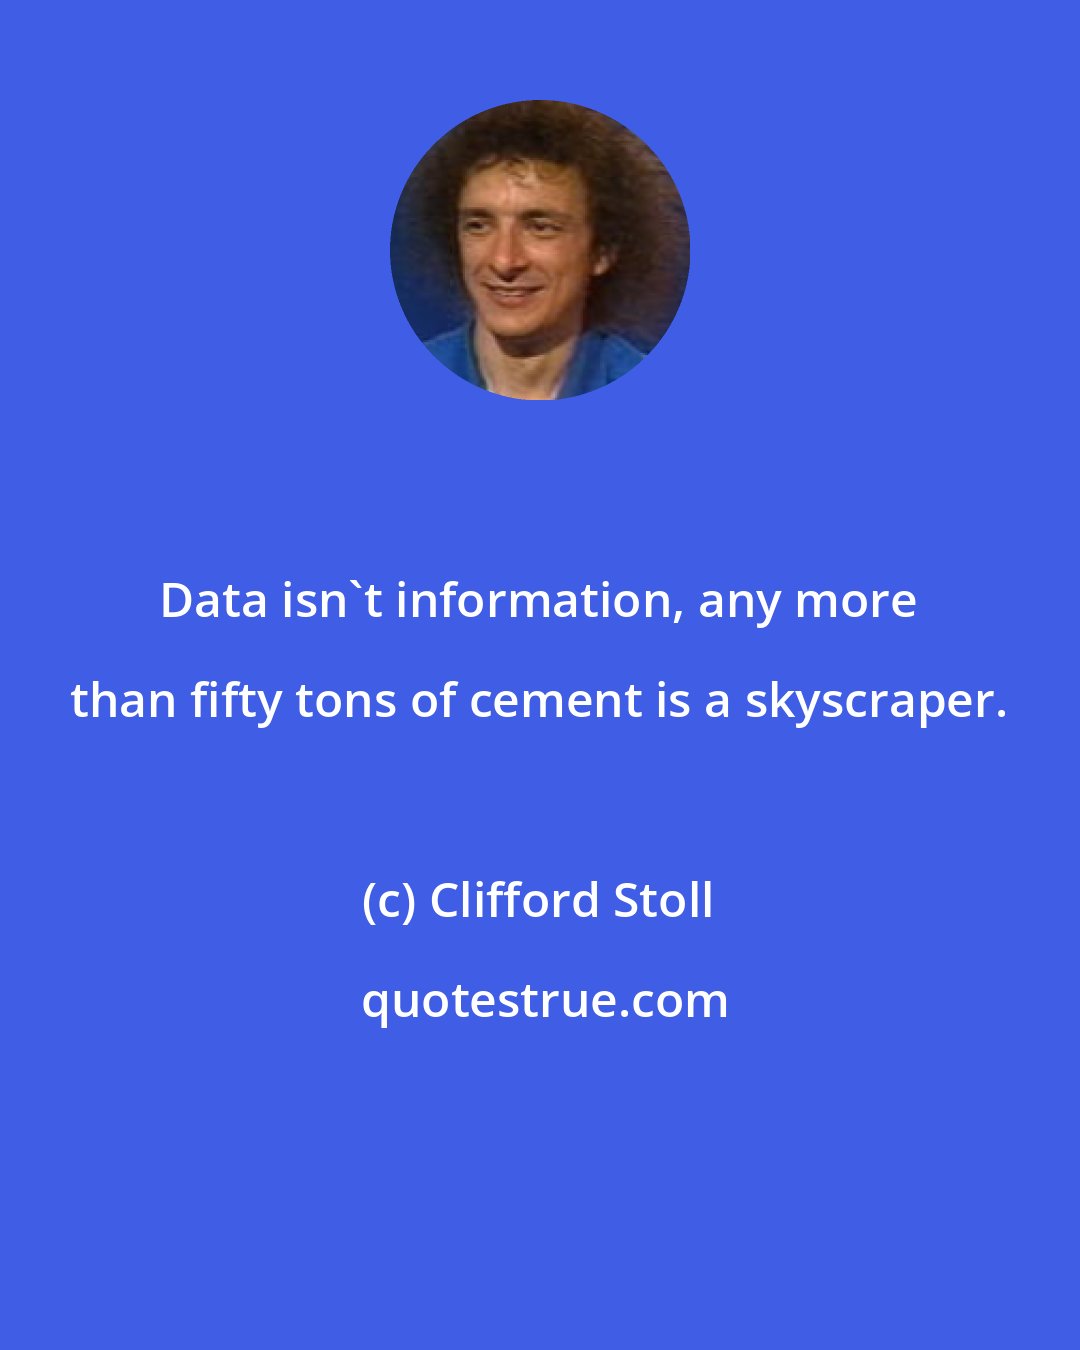 Clifford Stoll: Data isn't information, any more than fifty tons of cement is a skyscraper.